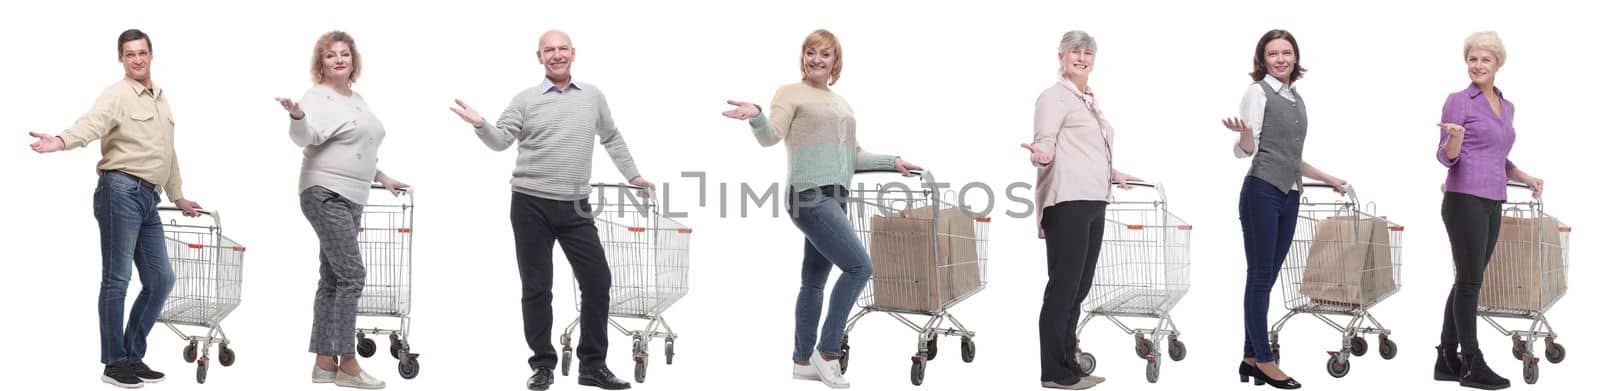 group of people with cart and outstretched hand thumbs up isolated on white background